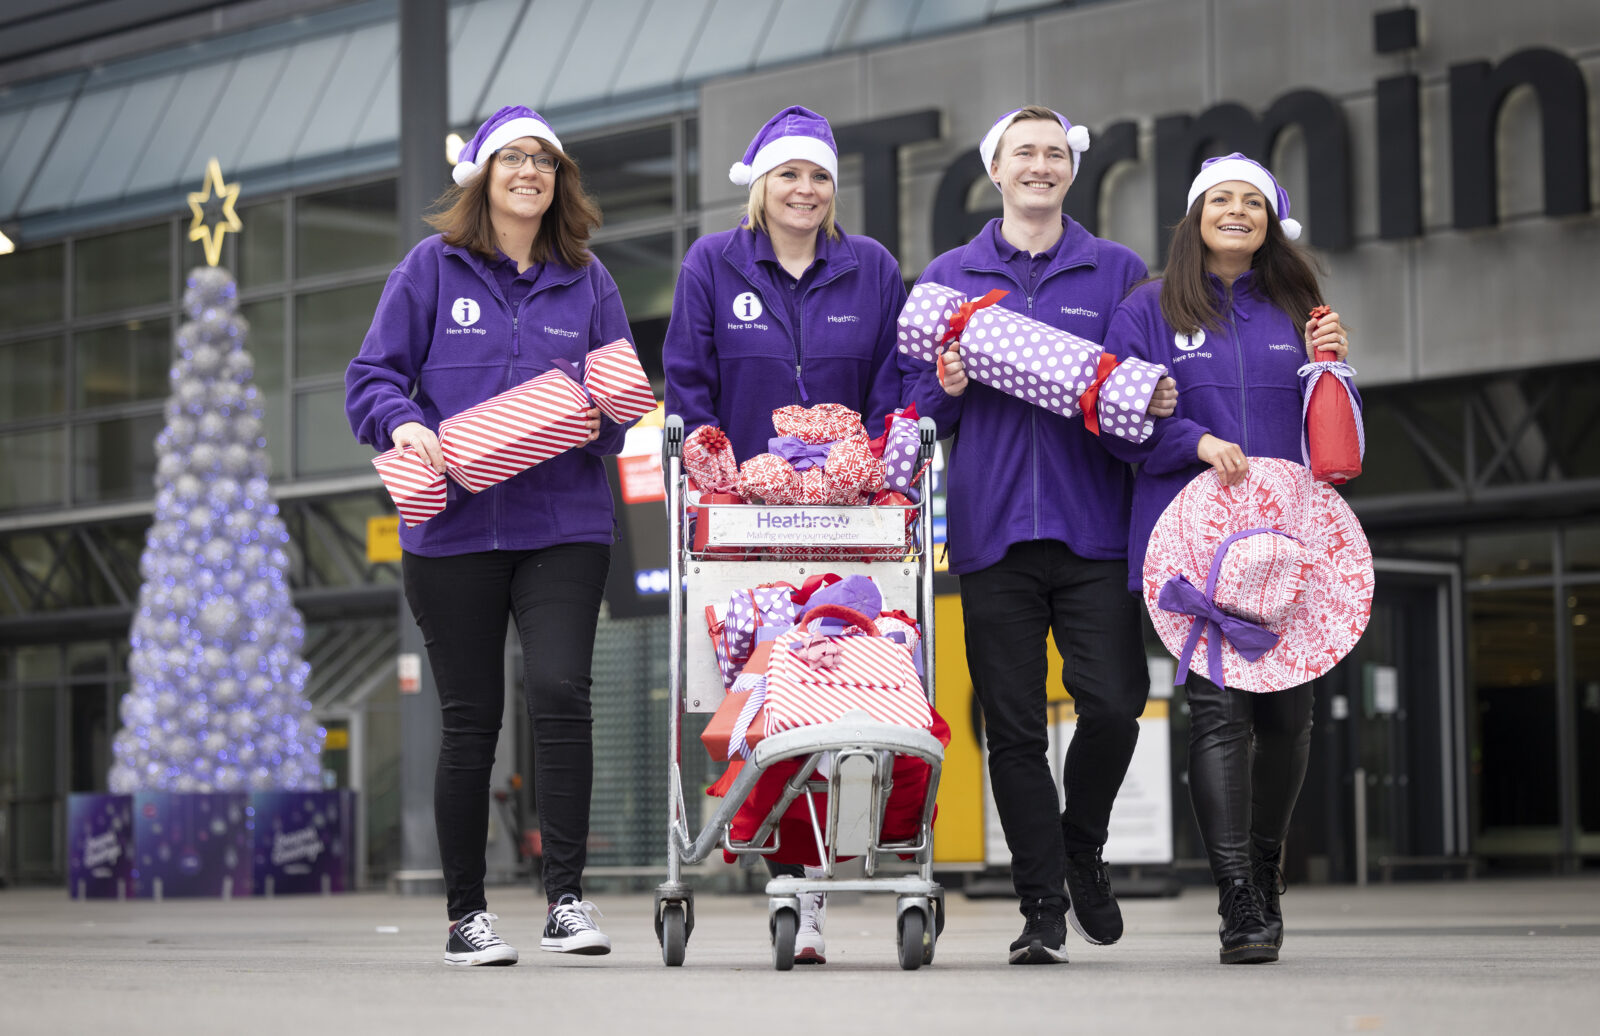 Heathrow Airport handing out Holiday Gifts